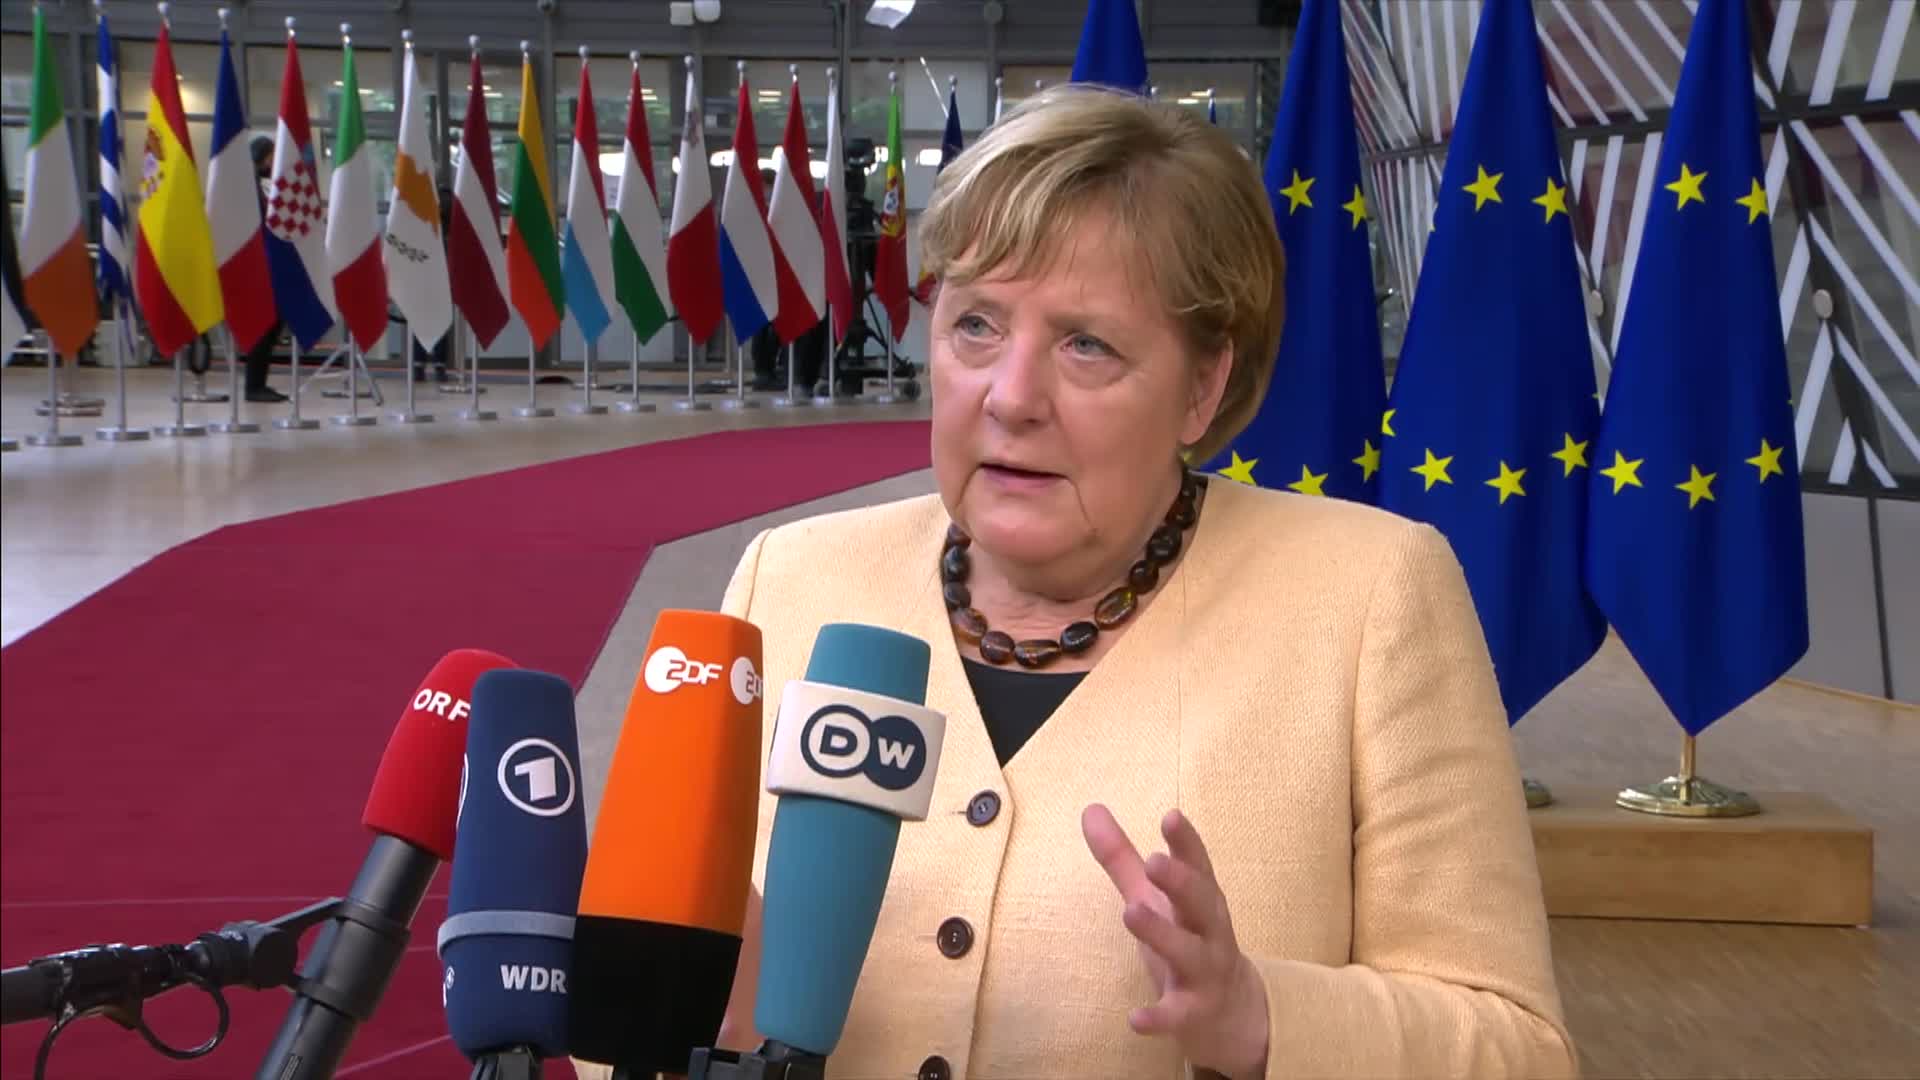 Video: Doorstep statement by Angela Merkel, Federal Chancellor of Germany.